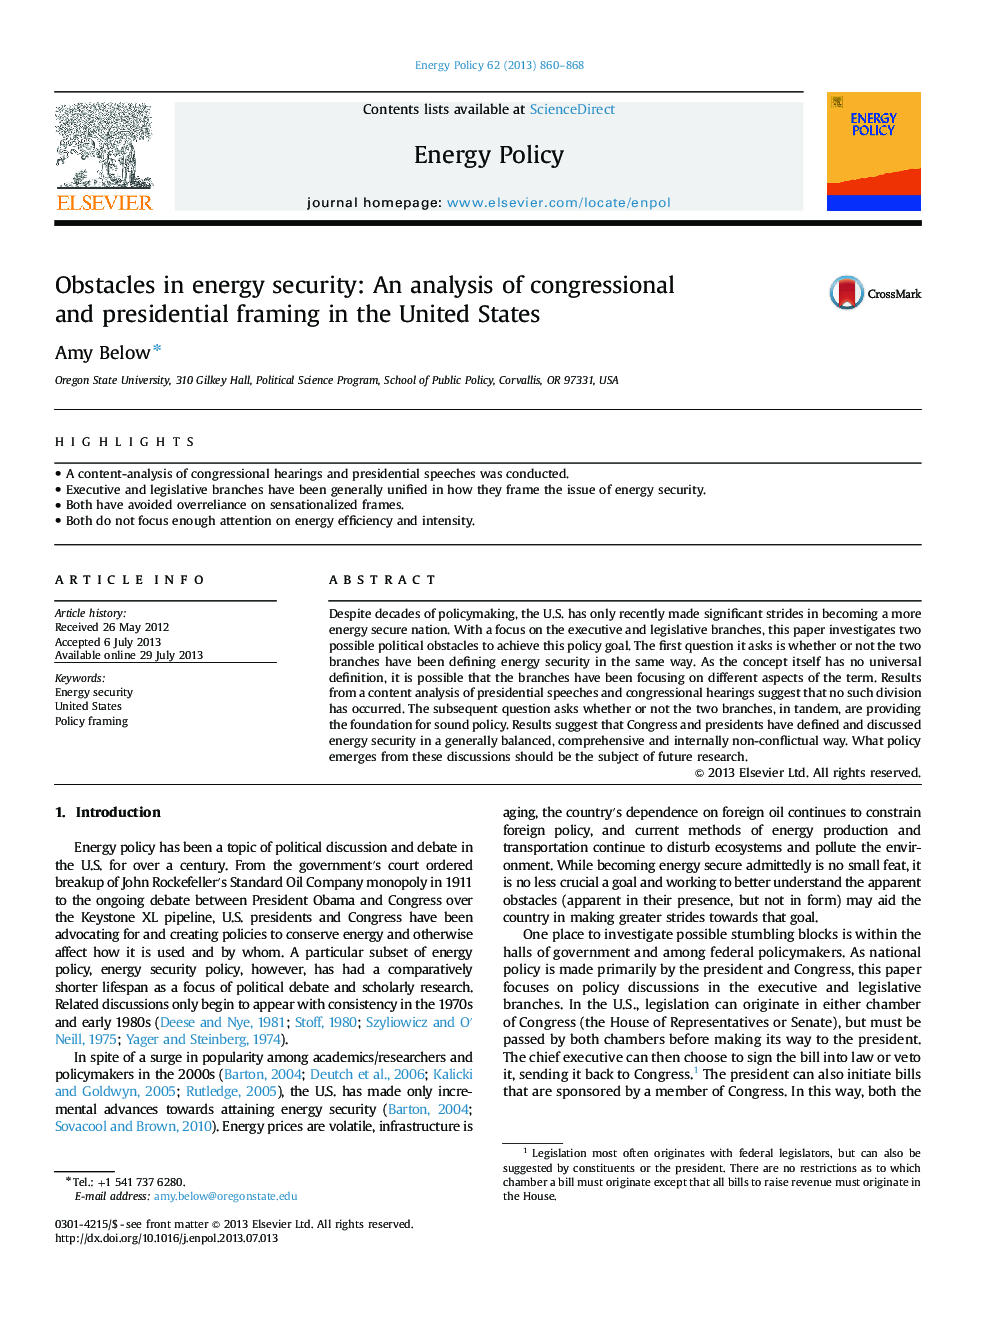 Obstacles in energy security: An analysis of congressional and presidential framing in the United States